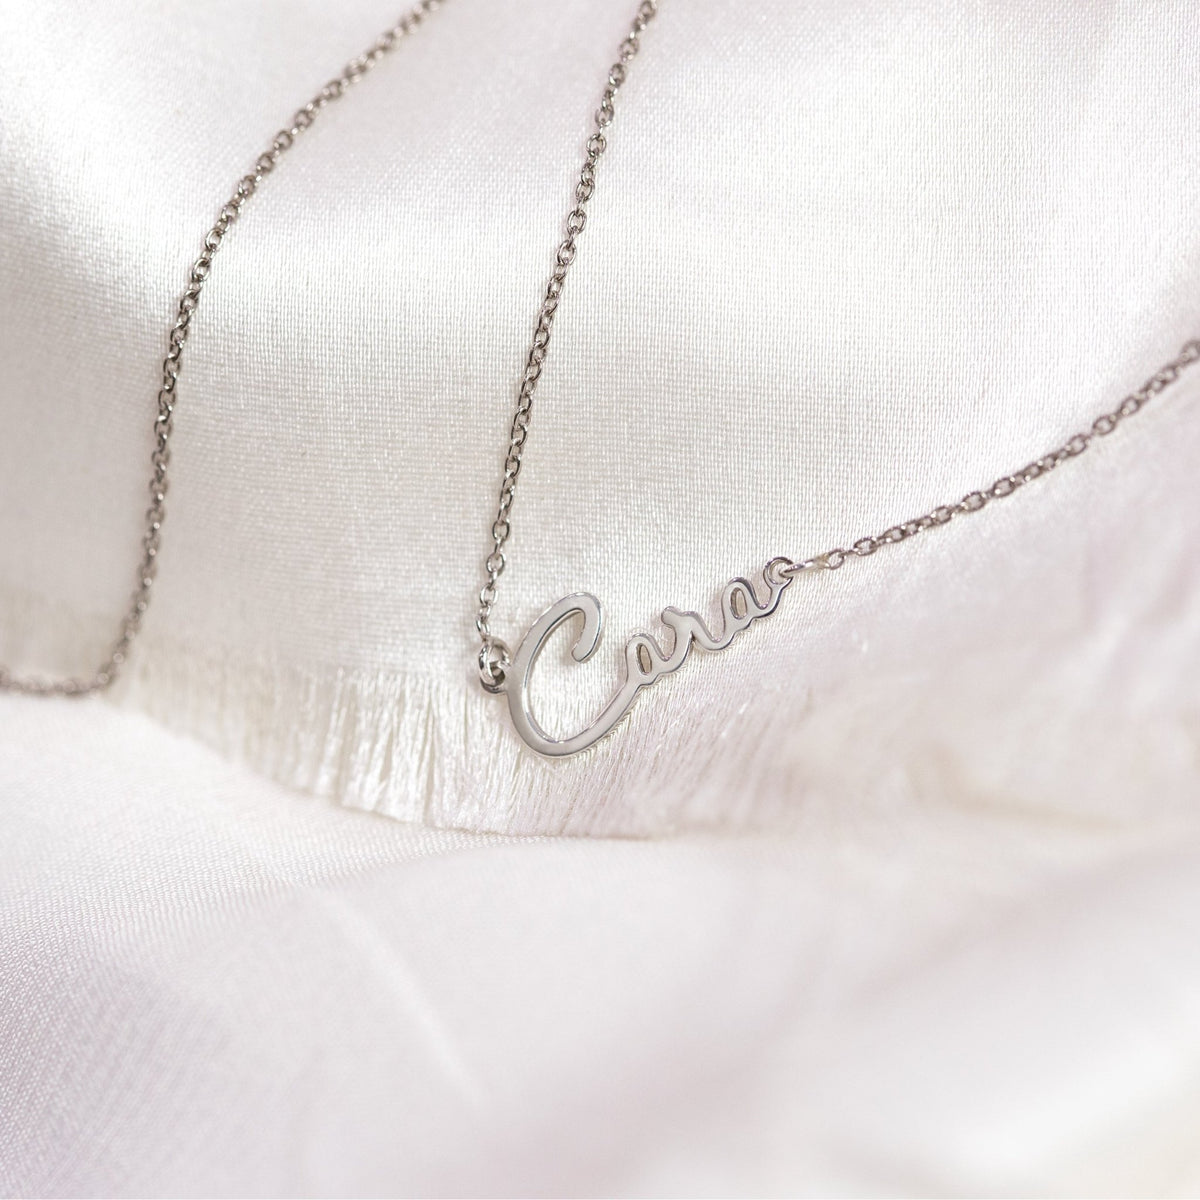 Personalized Name Necklace by Capucinne Blue